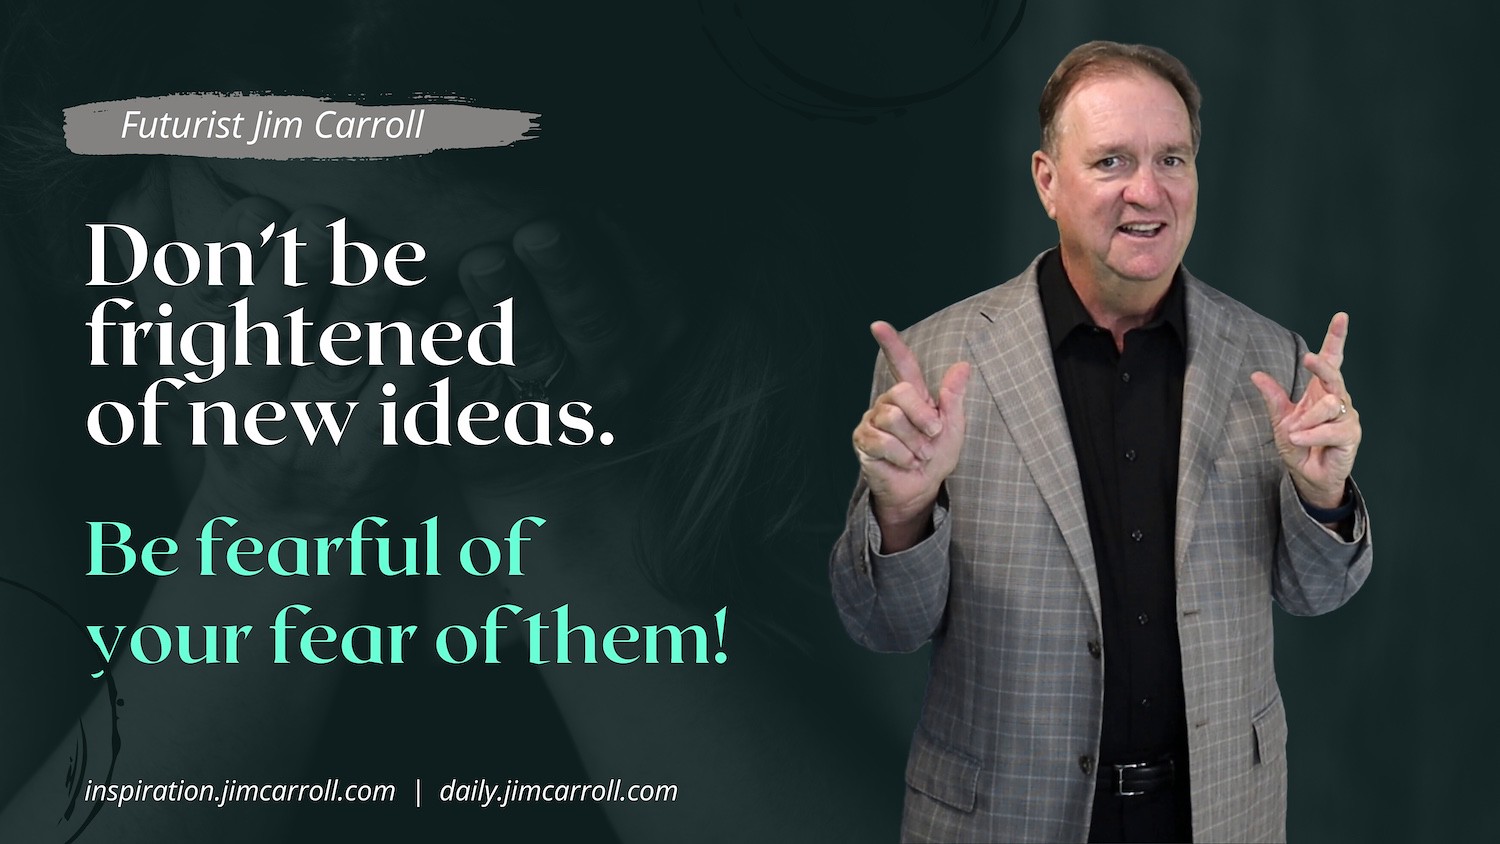 "Don't be frightened of new ideas. Be fearful of your fear of them!" - Futurist Jim Carroll